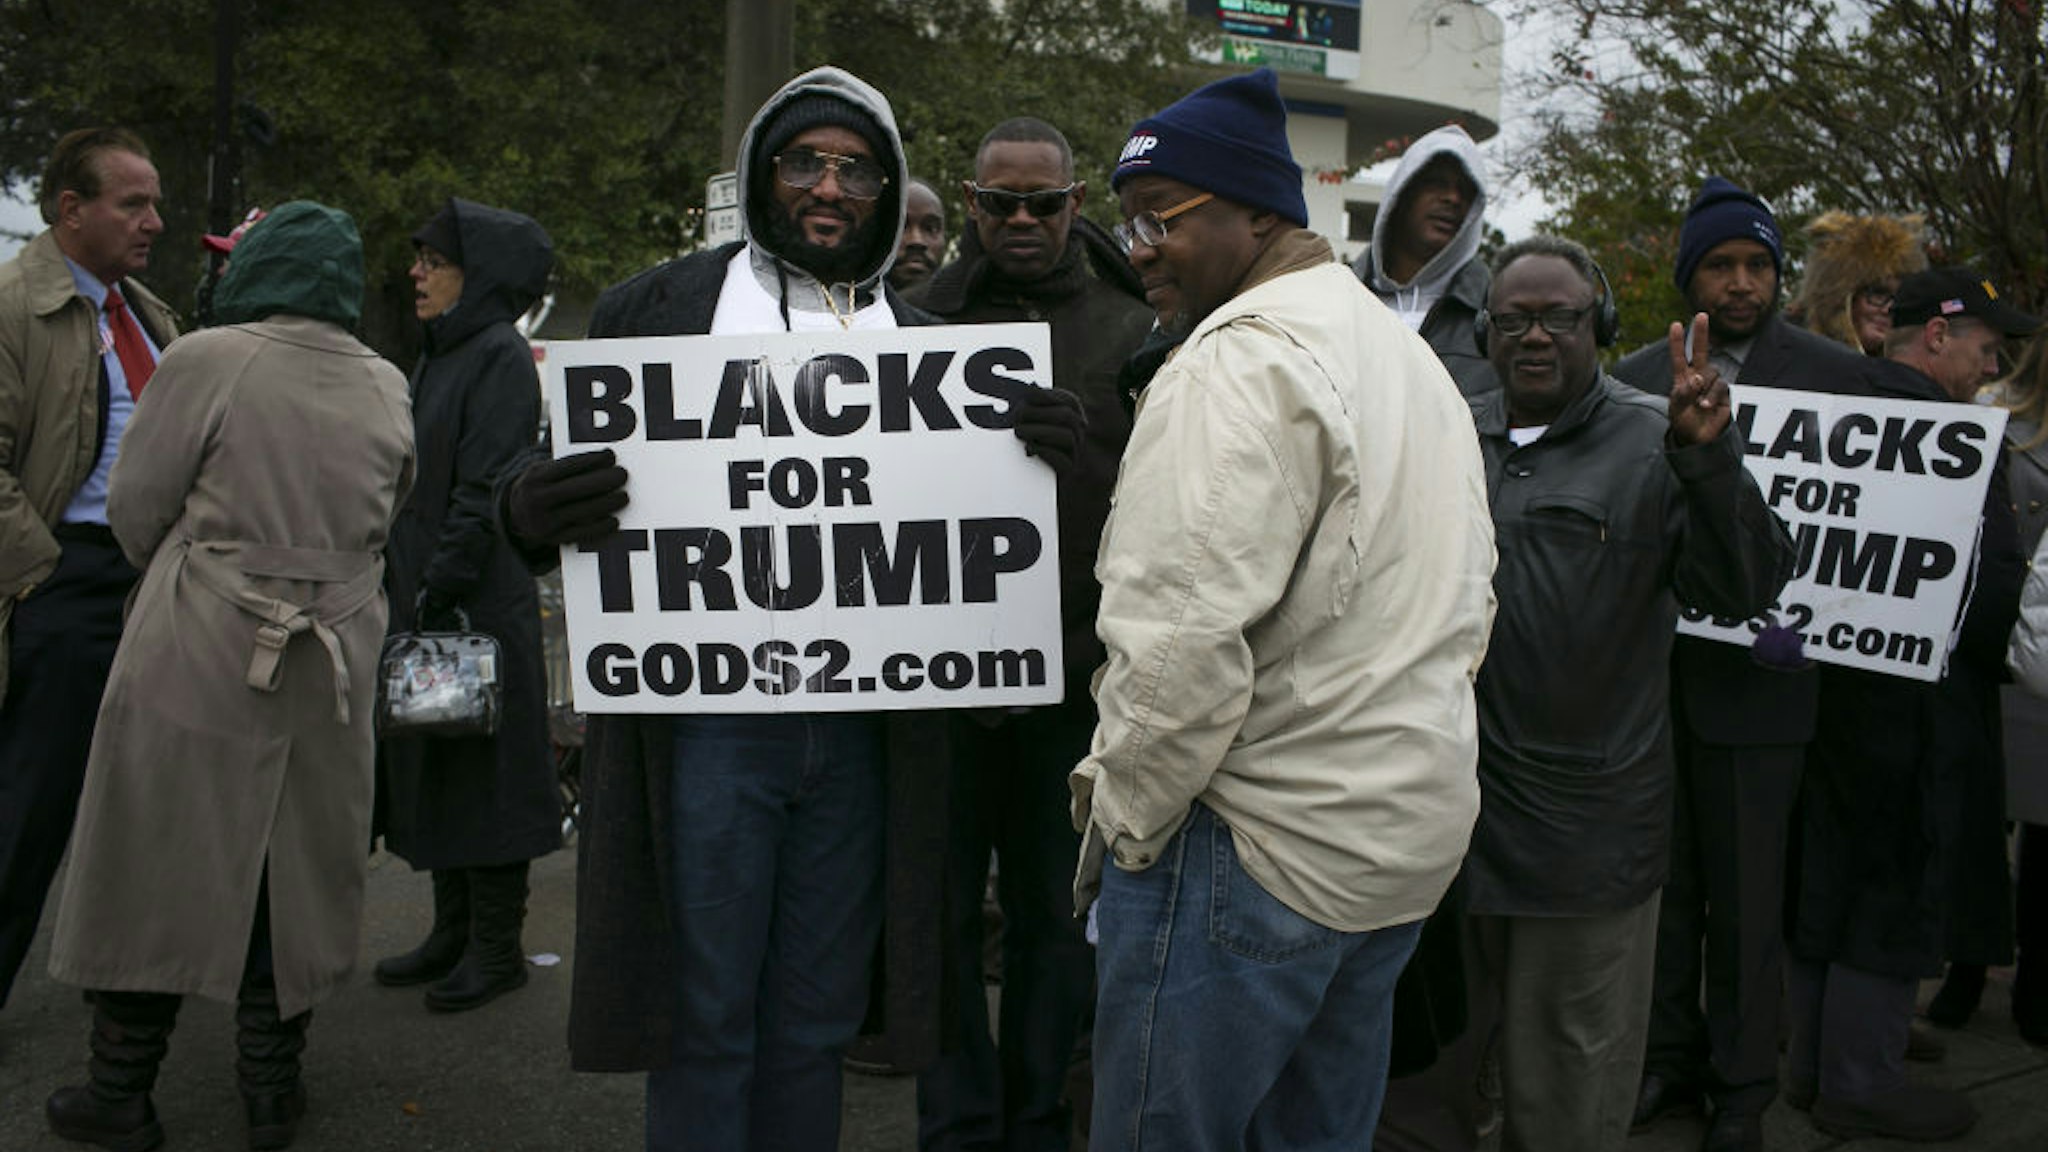 Attendees hold "Blacks For Trump" signs while waiting in line for a campaign rally with U.S. President Donald Trump in Pensacola, Florida, U.S., on Friday, Dec. 8, 2017.